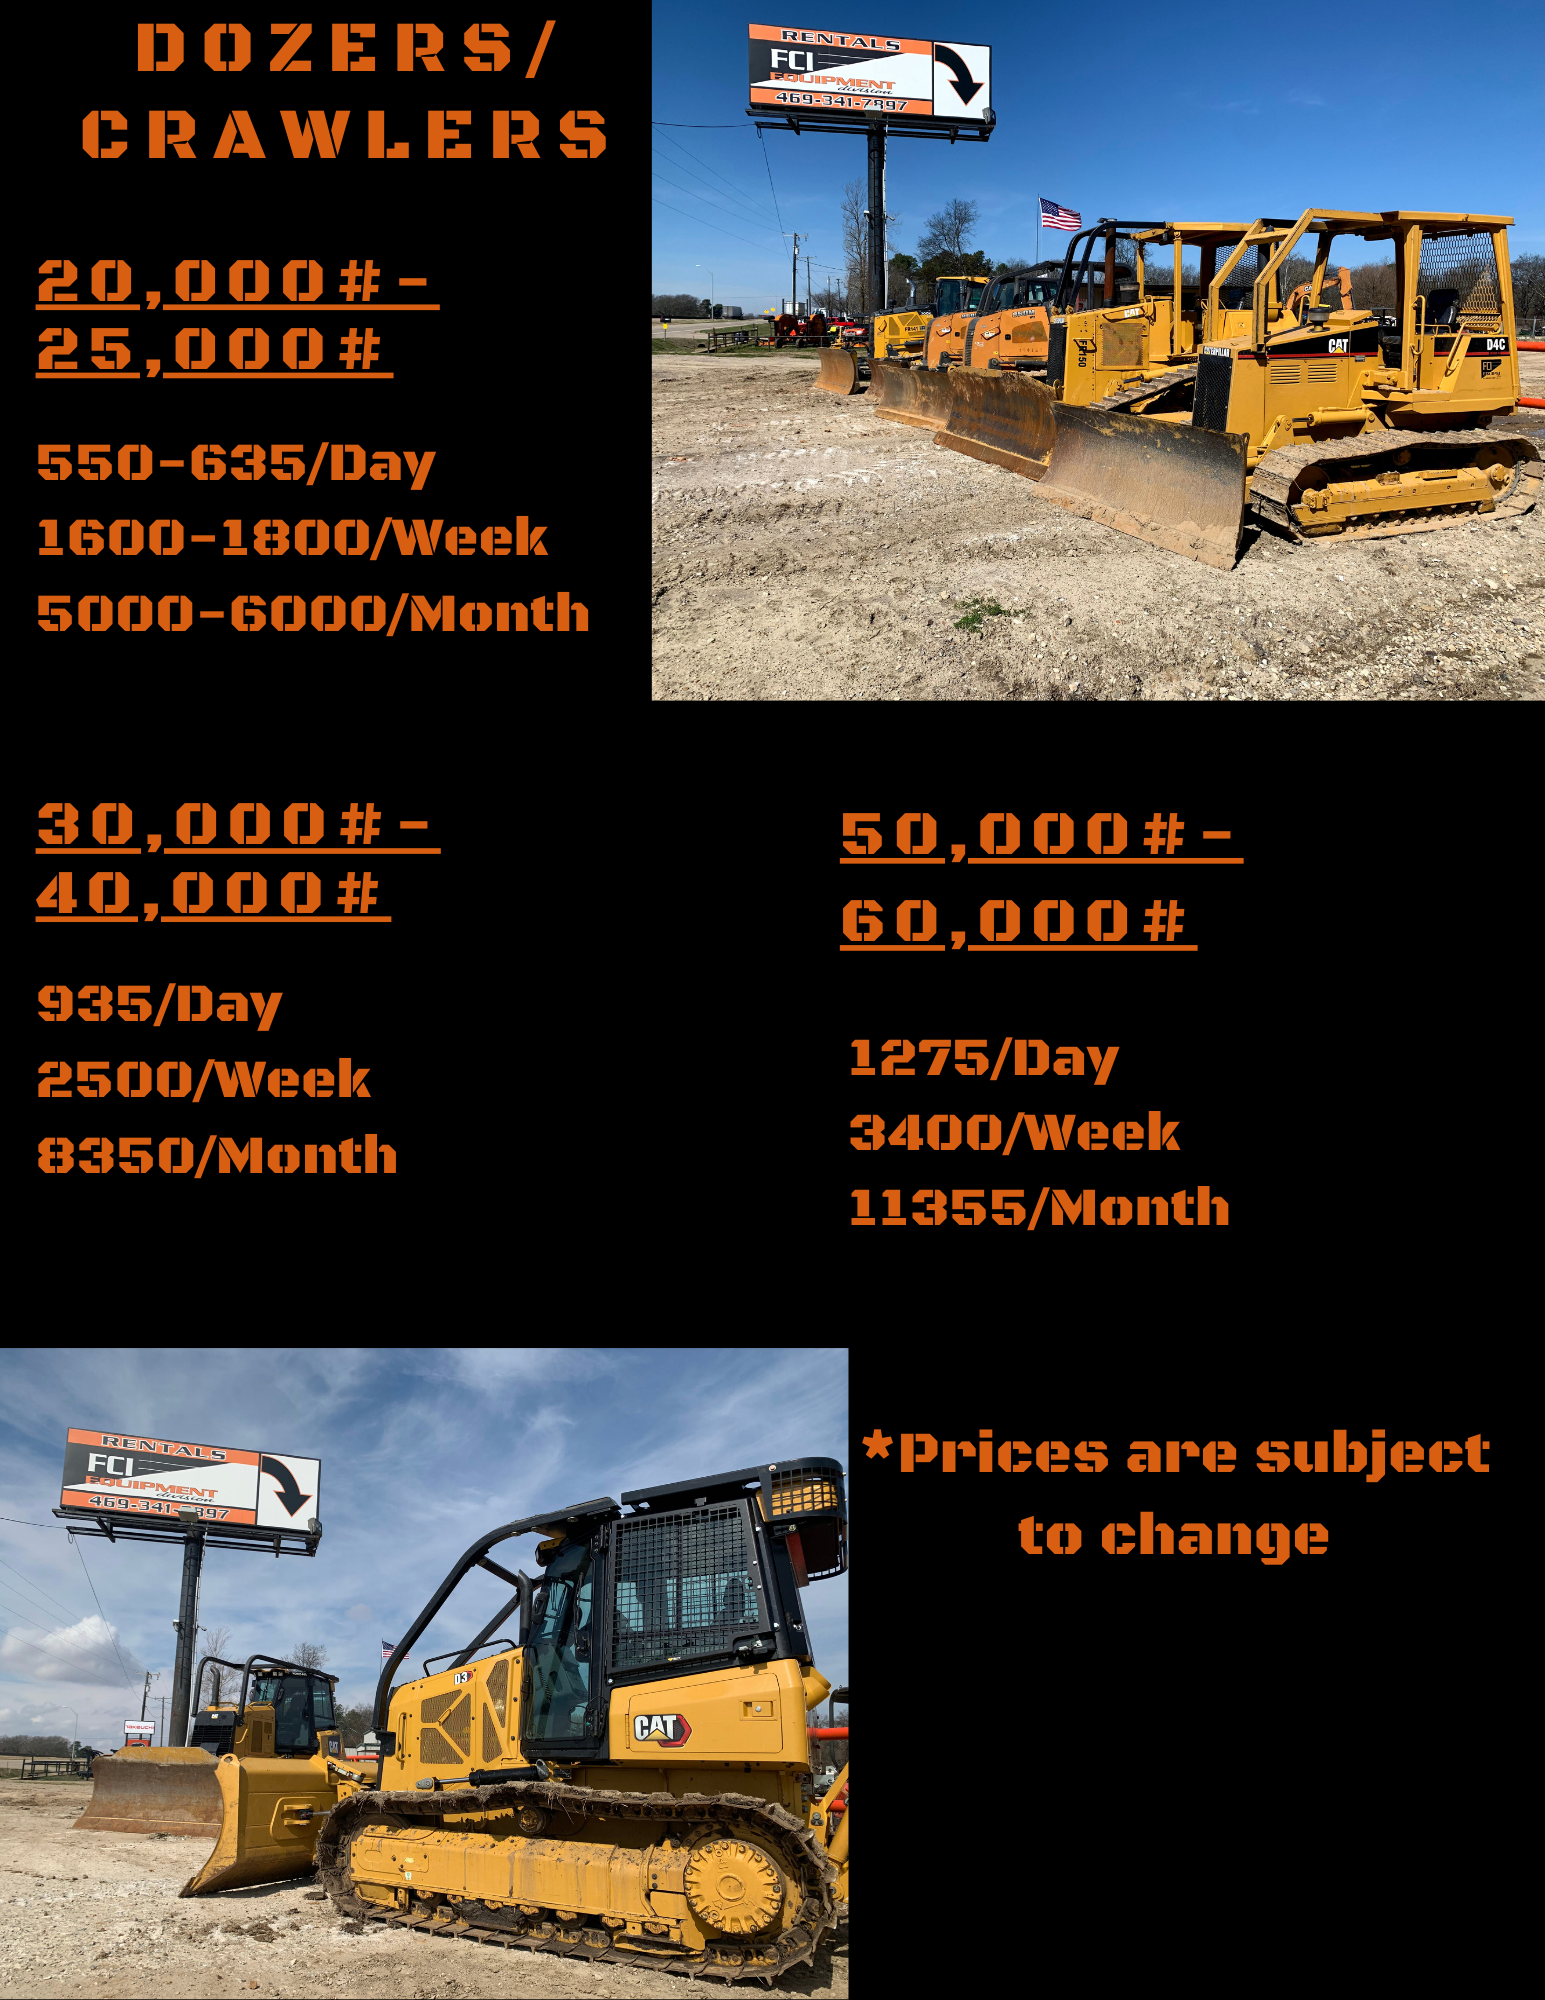 Dozers and Crawlers Pricing